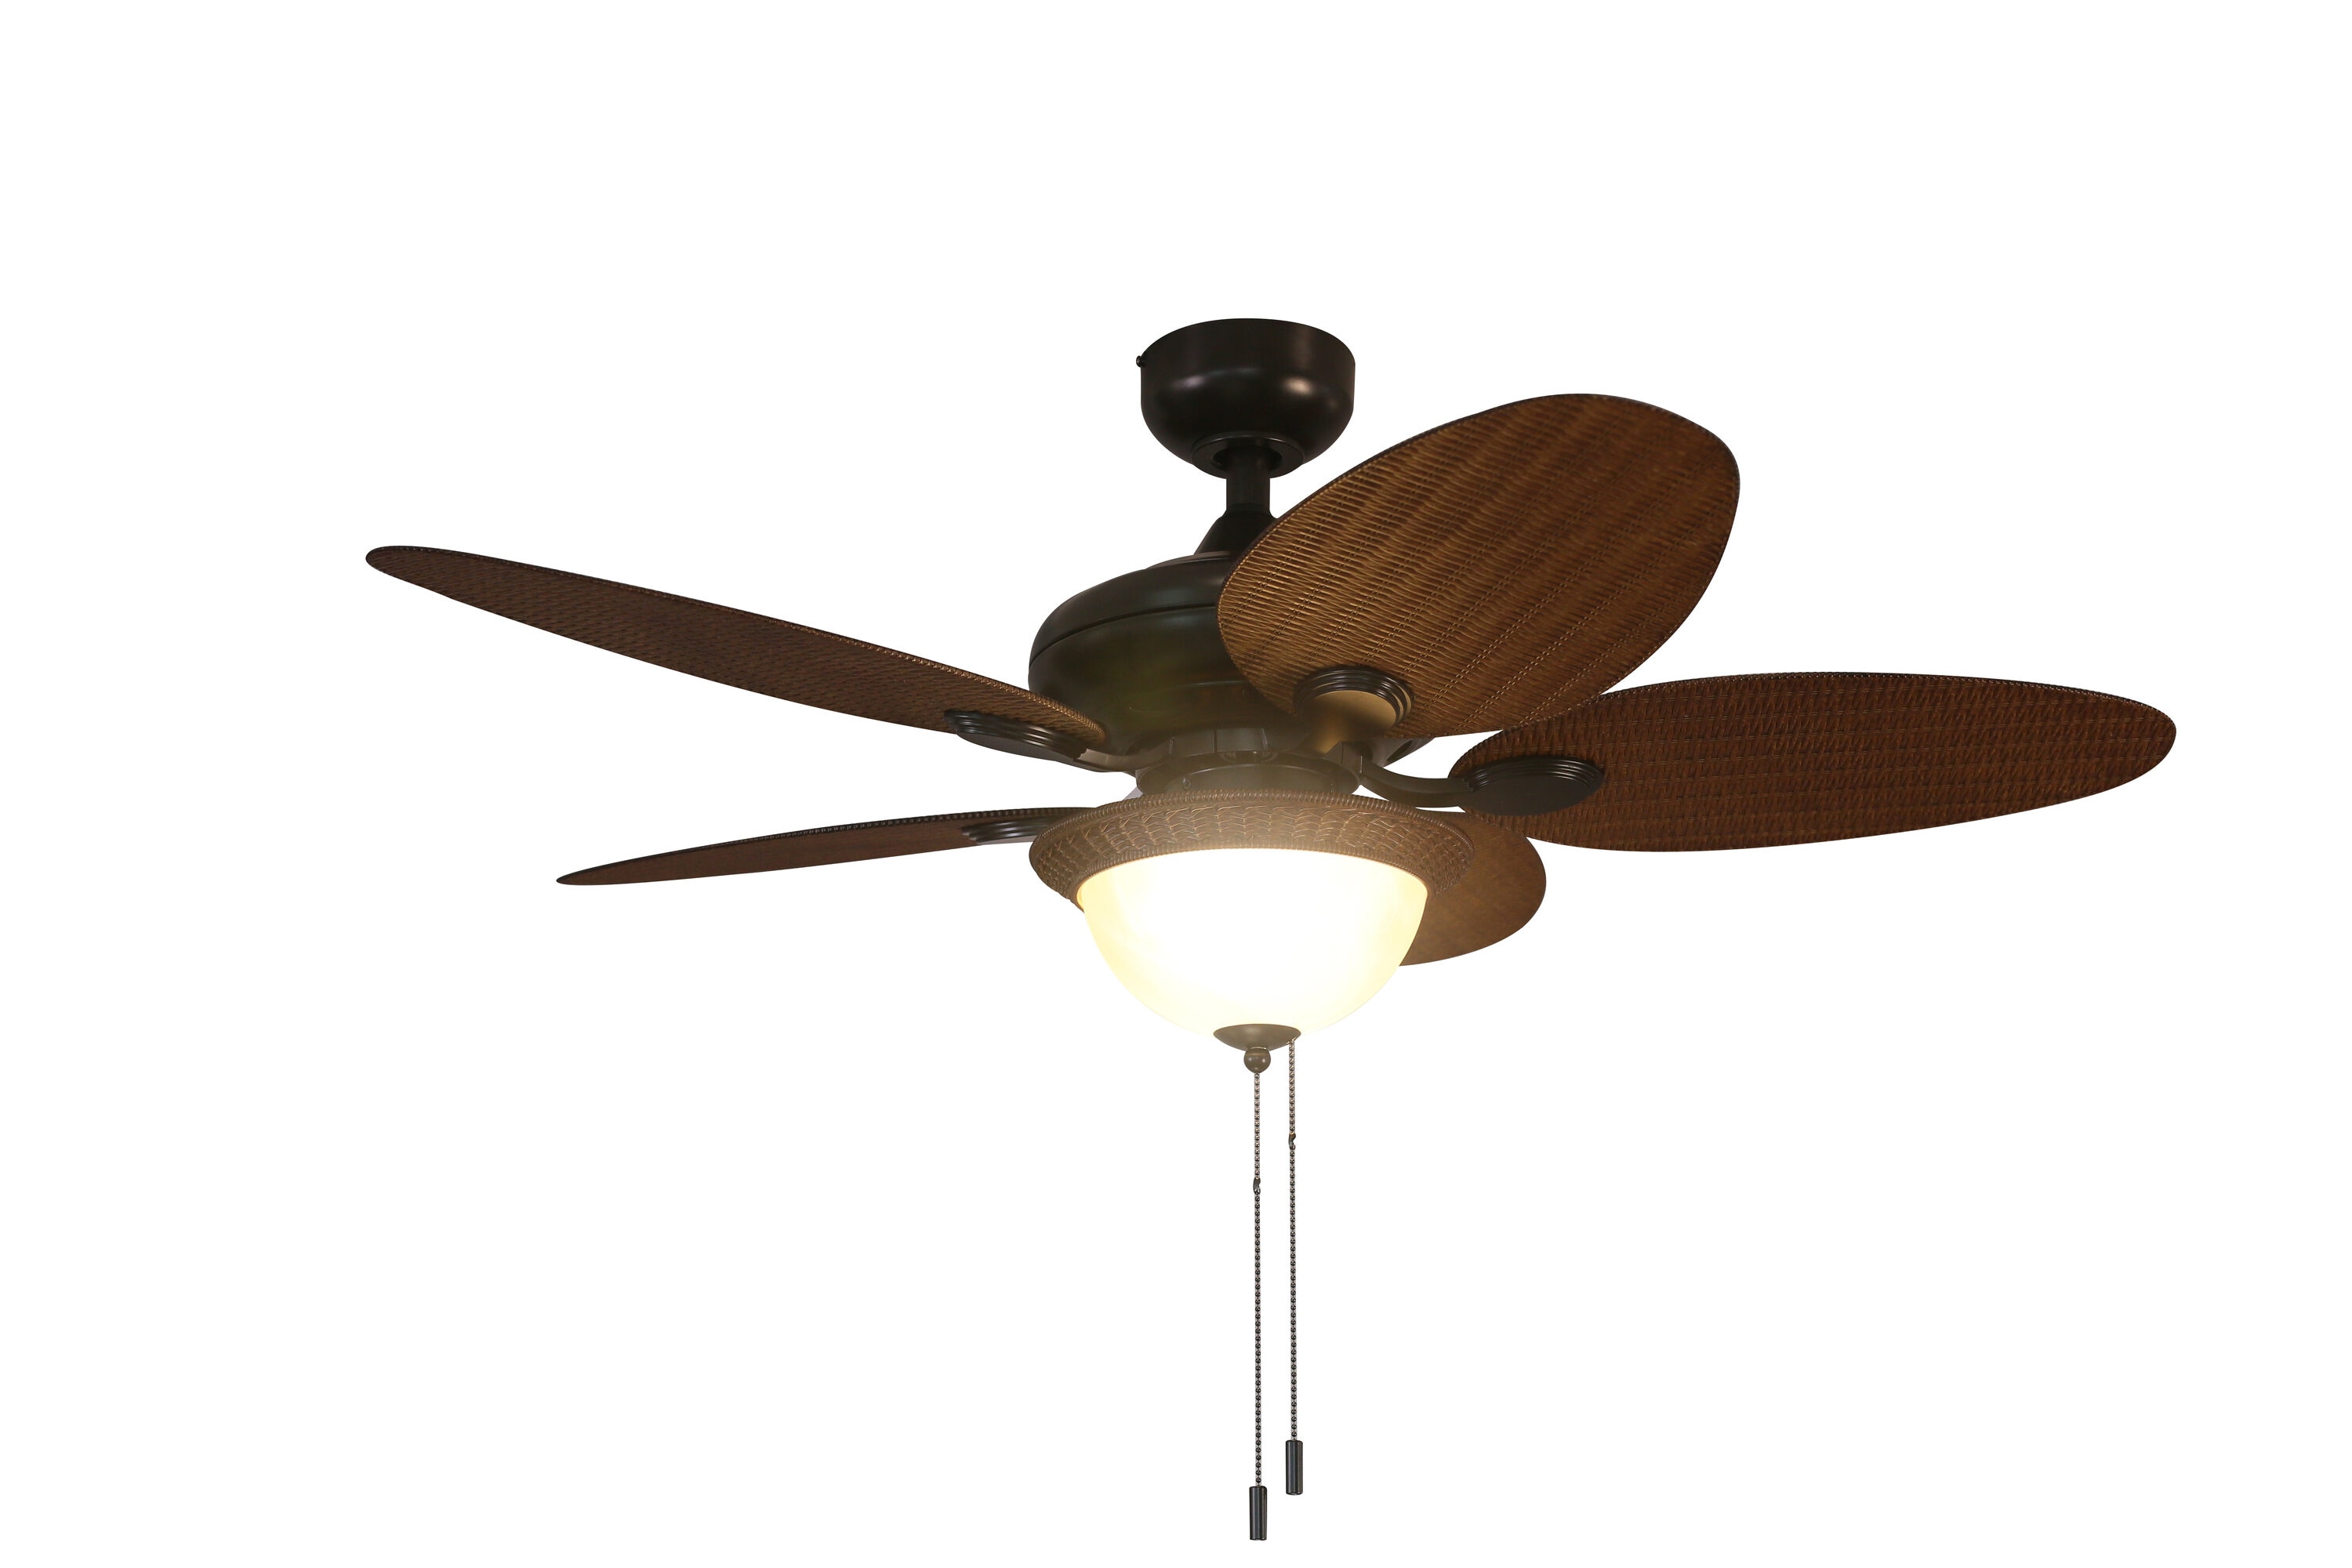 Harbor Breeze Tilghman 44 In Bronze Indoor Outdoor Downrod Or Flush Mount Ceiling Fan With Light 5 Blade The Fans Department At Lowes Com